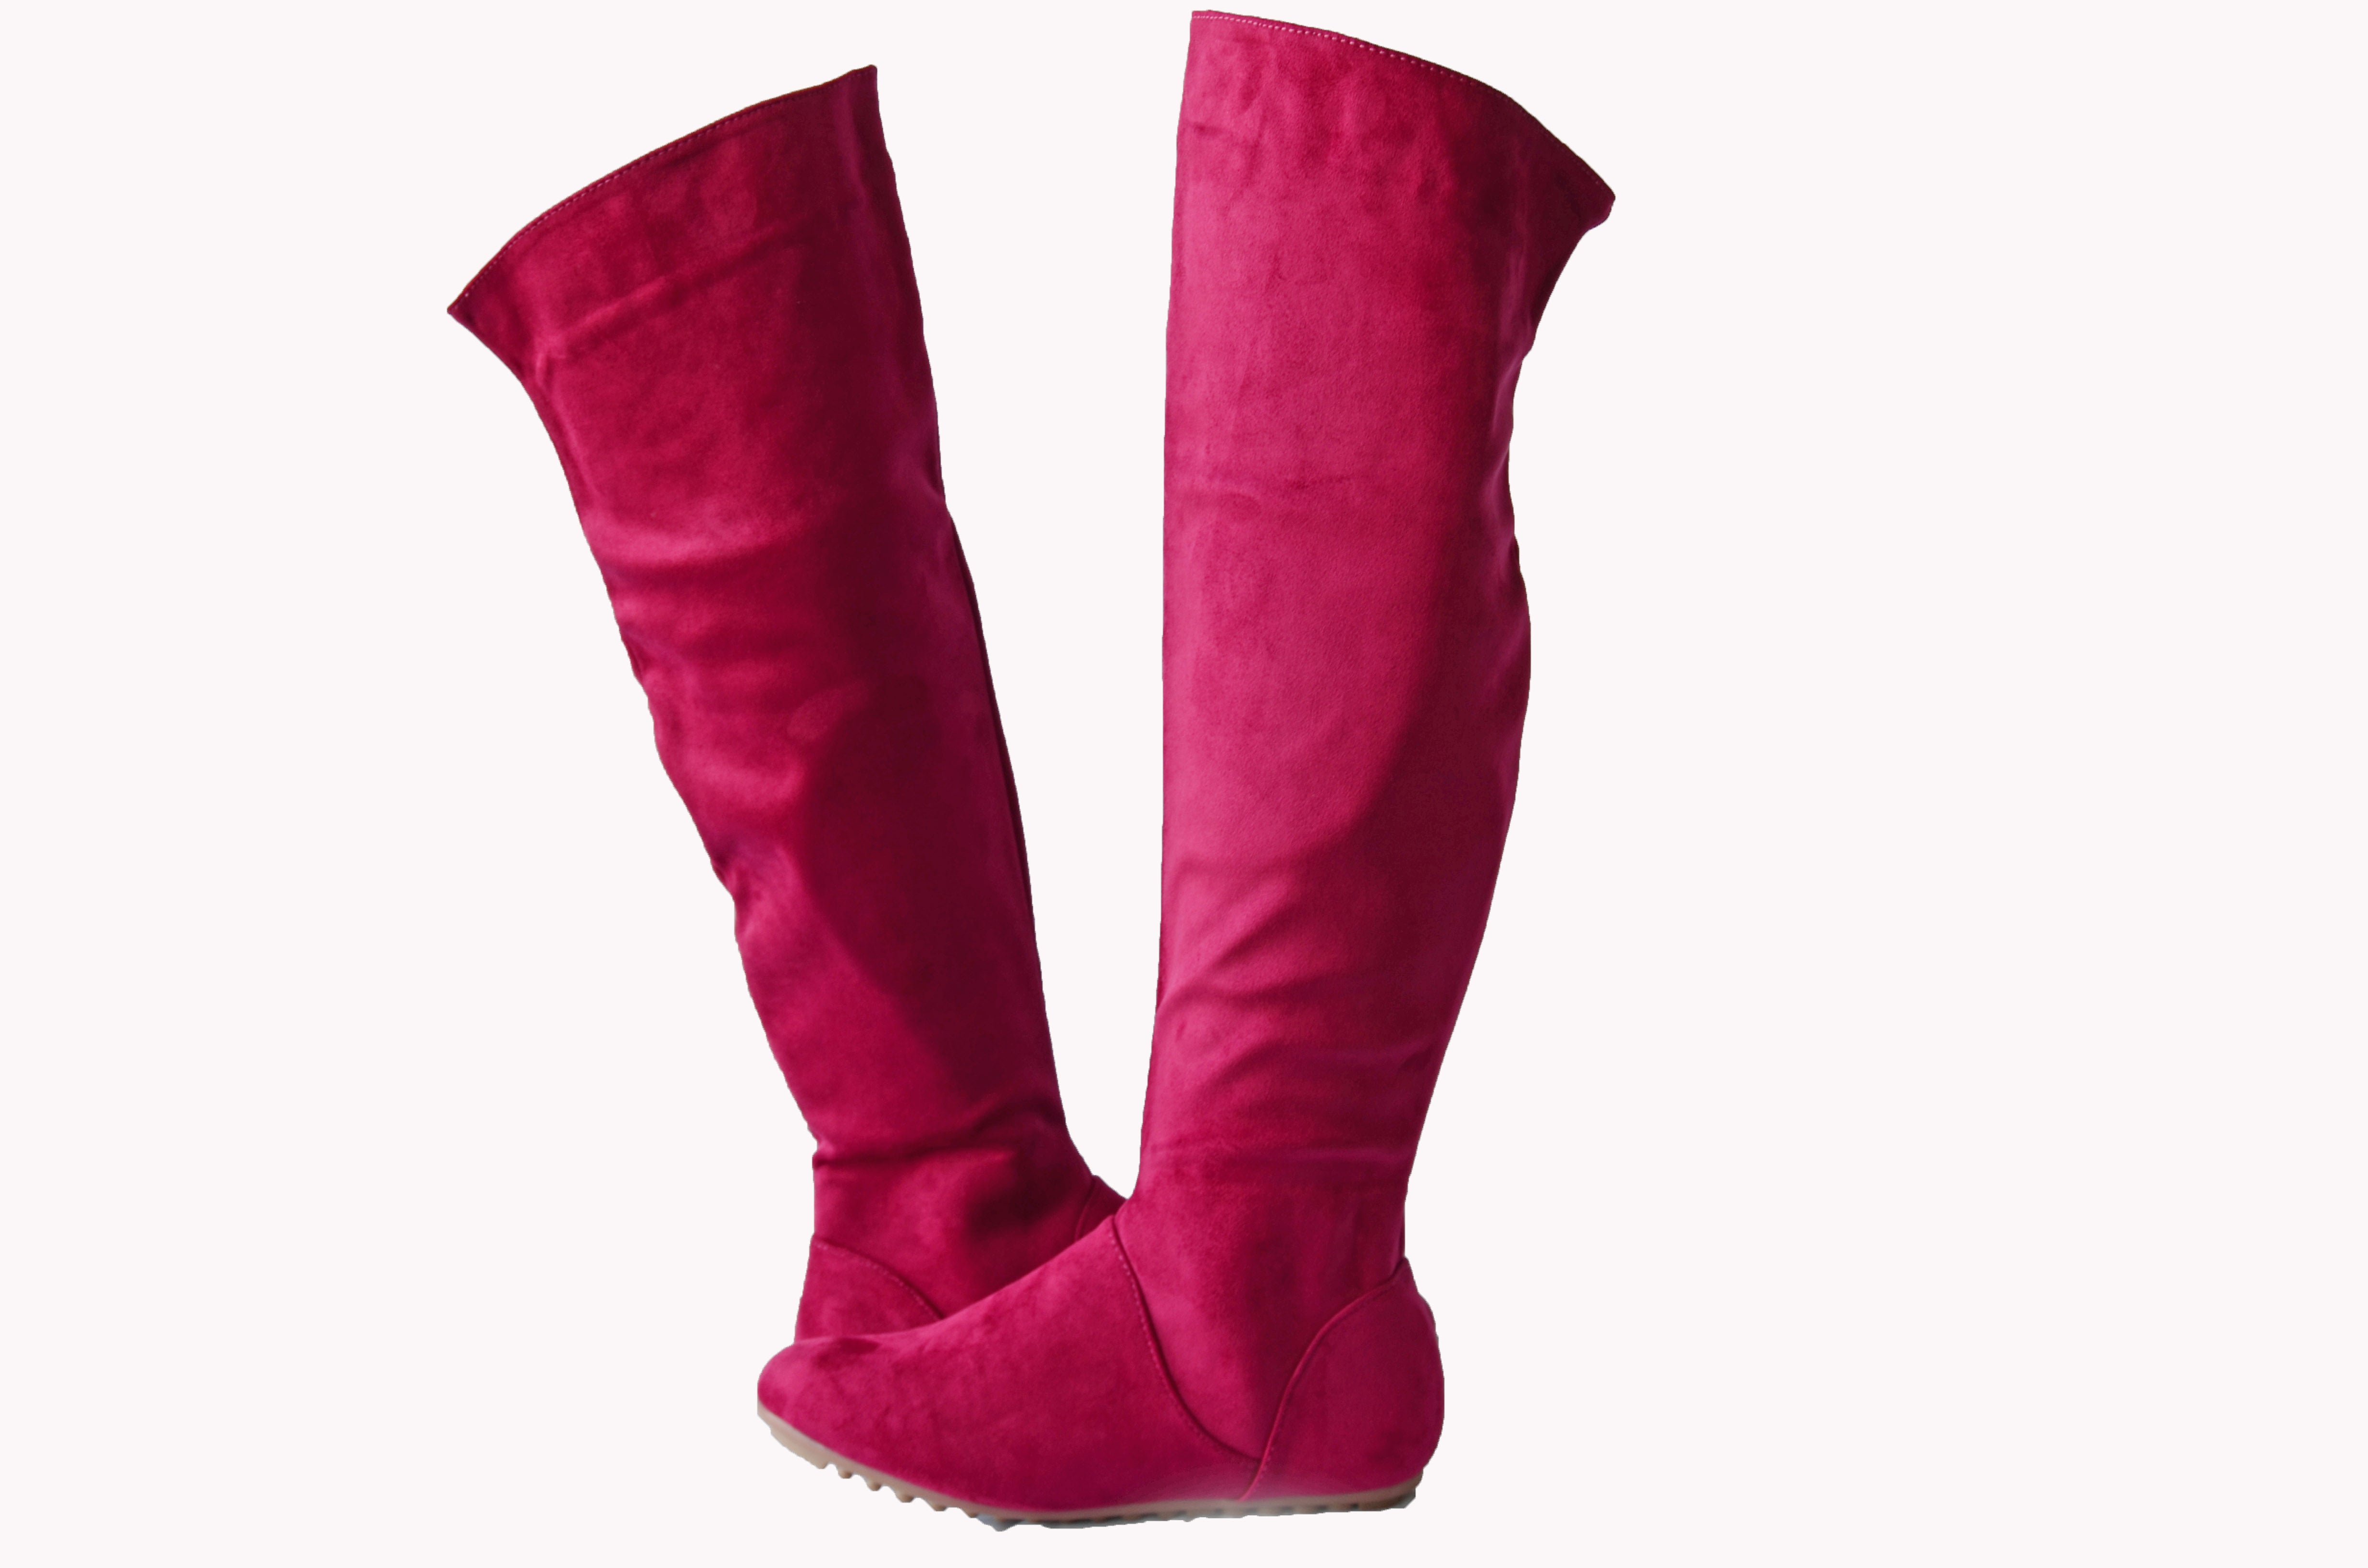 Christy - Thigh High Carnival/Festival Boots